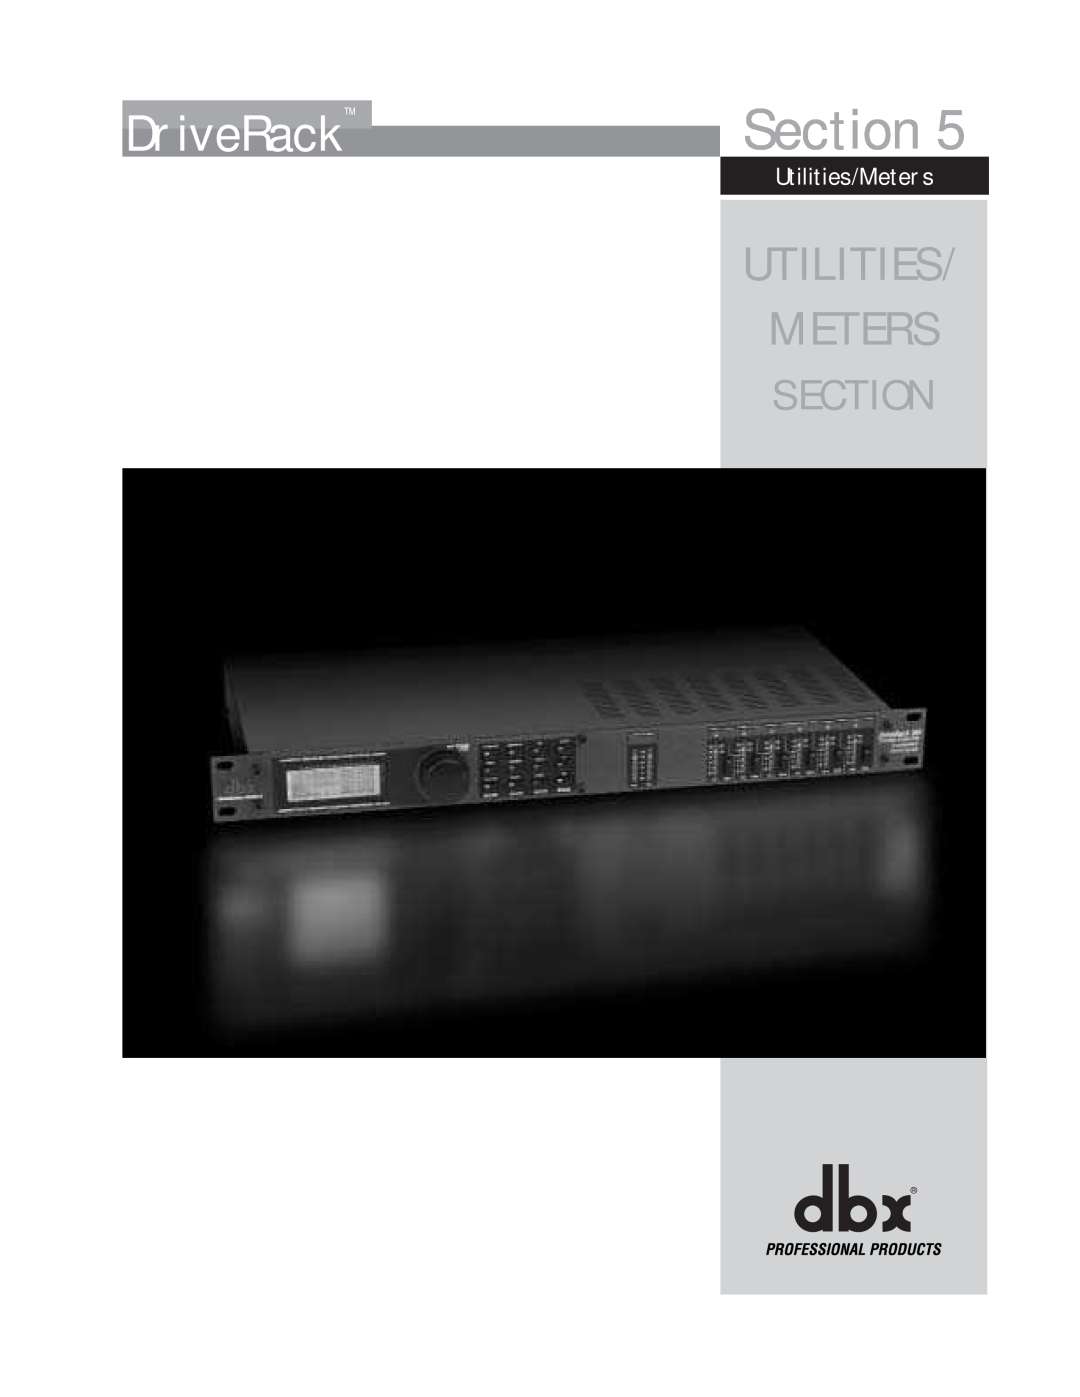 dbx Pro 260 user manual Section, DriveRack, Utilities/Meters 